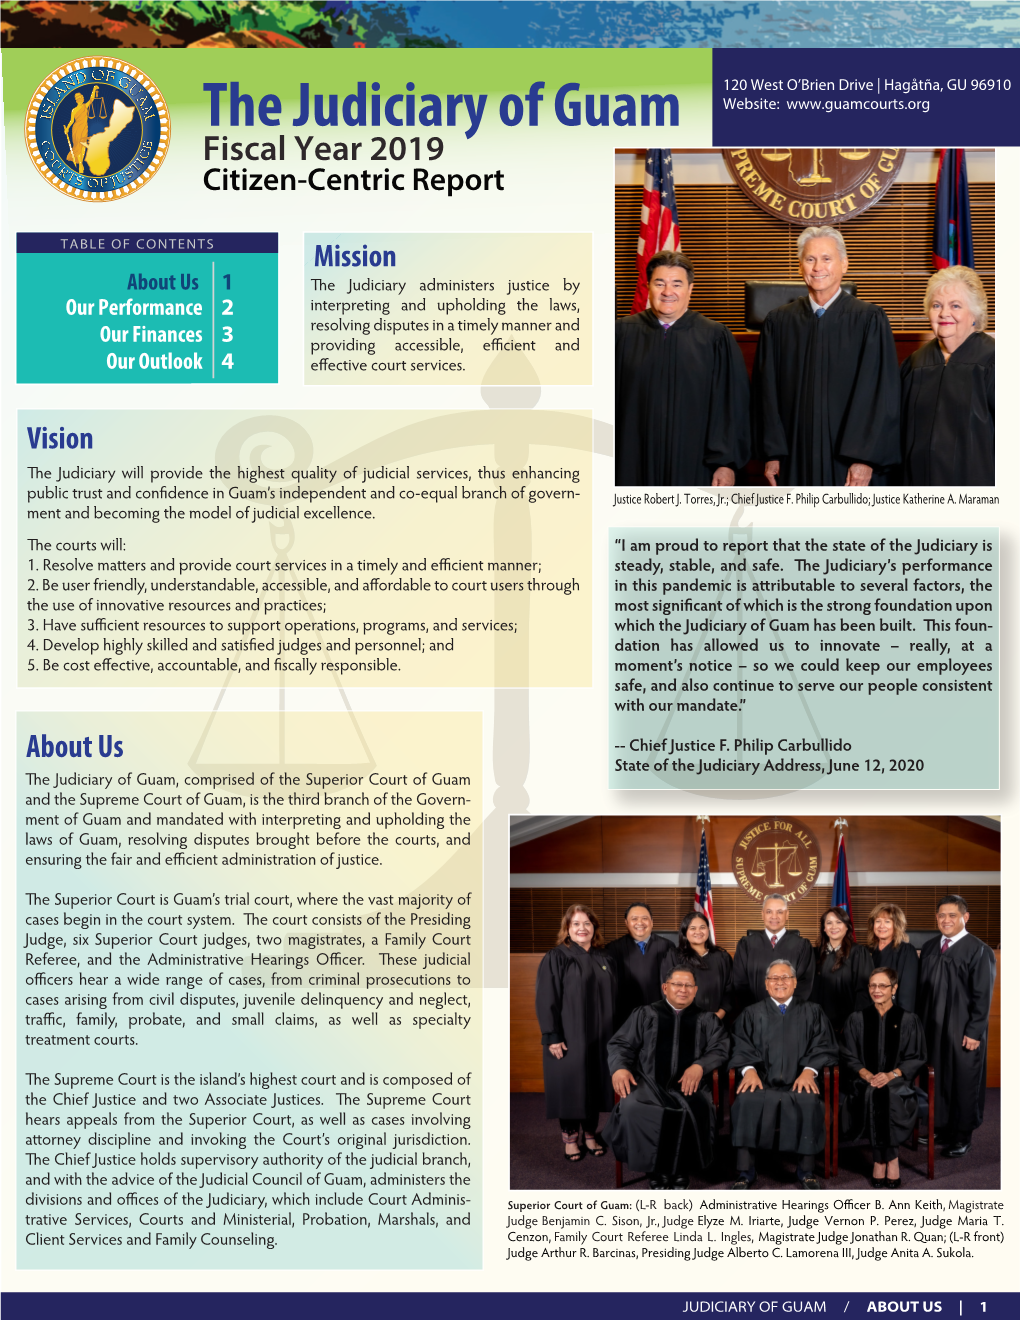 The Judiciary of Guam Website: Fiscal Year 2019 Citizen-Centric Report